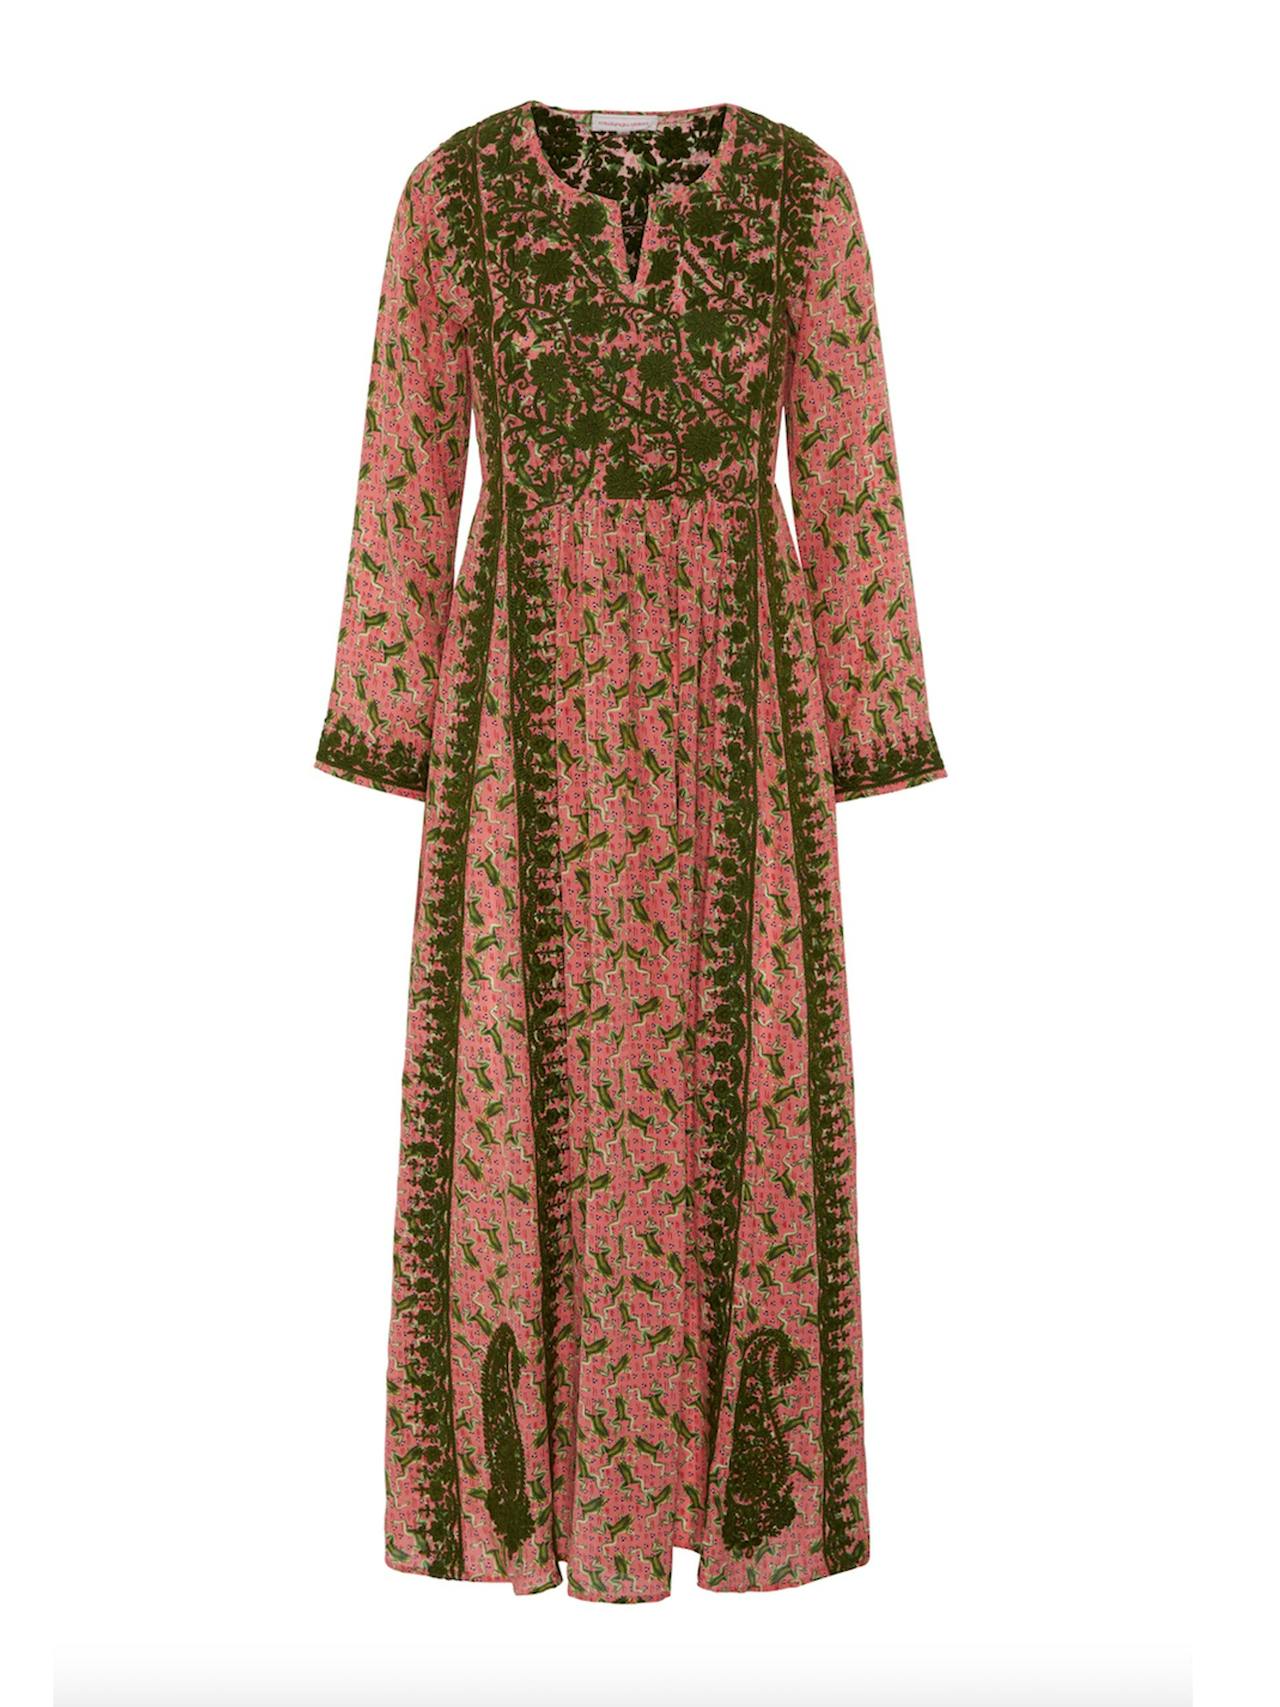 Frog blossom silk embroidered dress